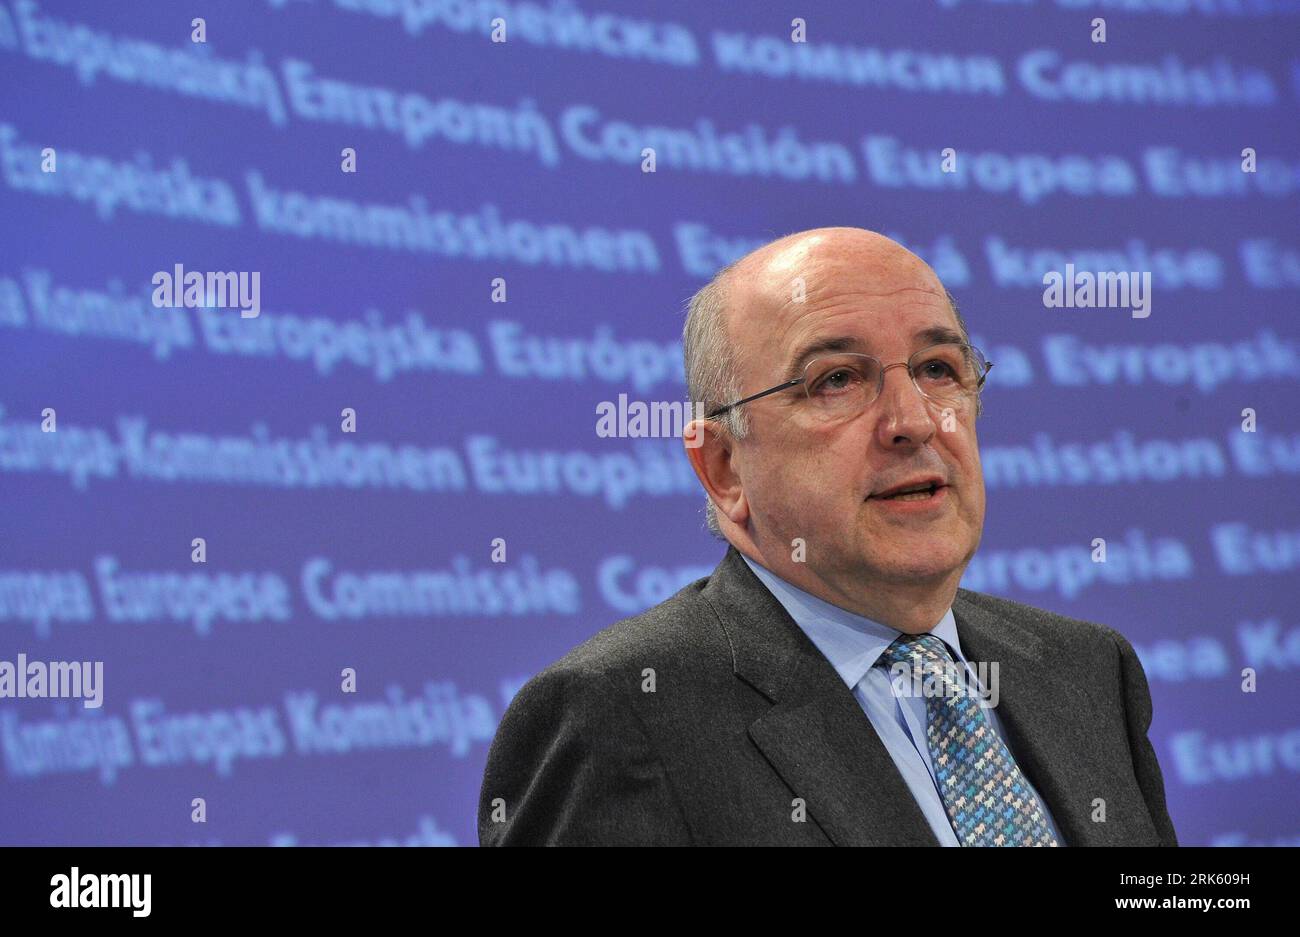 Bildnummer: 53772660  Datum: 03.02.2010  Copyright: imago/Xinhua (100203) -- BRUSSELS, Feb. 3, 2010 (Xinhua) -- EU Economic and Monetary Affairs Commissioner Joaquin Almunia addresses a news conference at EU headquarters in Brussels, capital of Belgium, on Feb. 3, 2010. The European Commission (EC) endorsed on Wednesday Greece s plan to bring its budget deficit below 3 percent of gross domestic product (GDP) by 2012, saying it would closely monitor the plan s execution. (Xinhua/Wu Wei) (hdt) (2)BELGIUM-EC-GREECE-PLAN-BUDGET DEFICIT PUBLICATIONxNOTxINxCHN People Politik Porträt kbdig xsk 2010 q Stock Photo